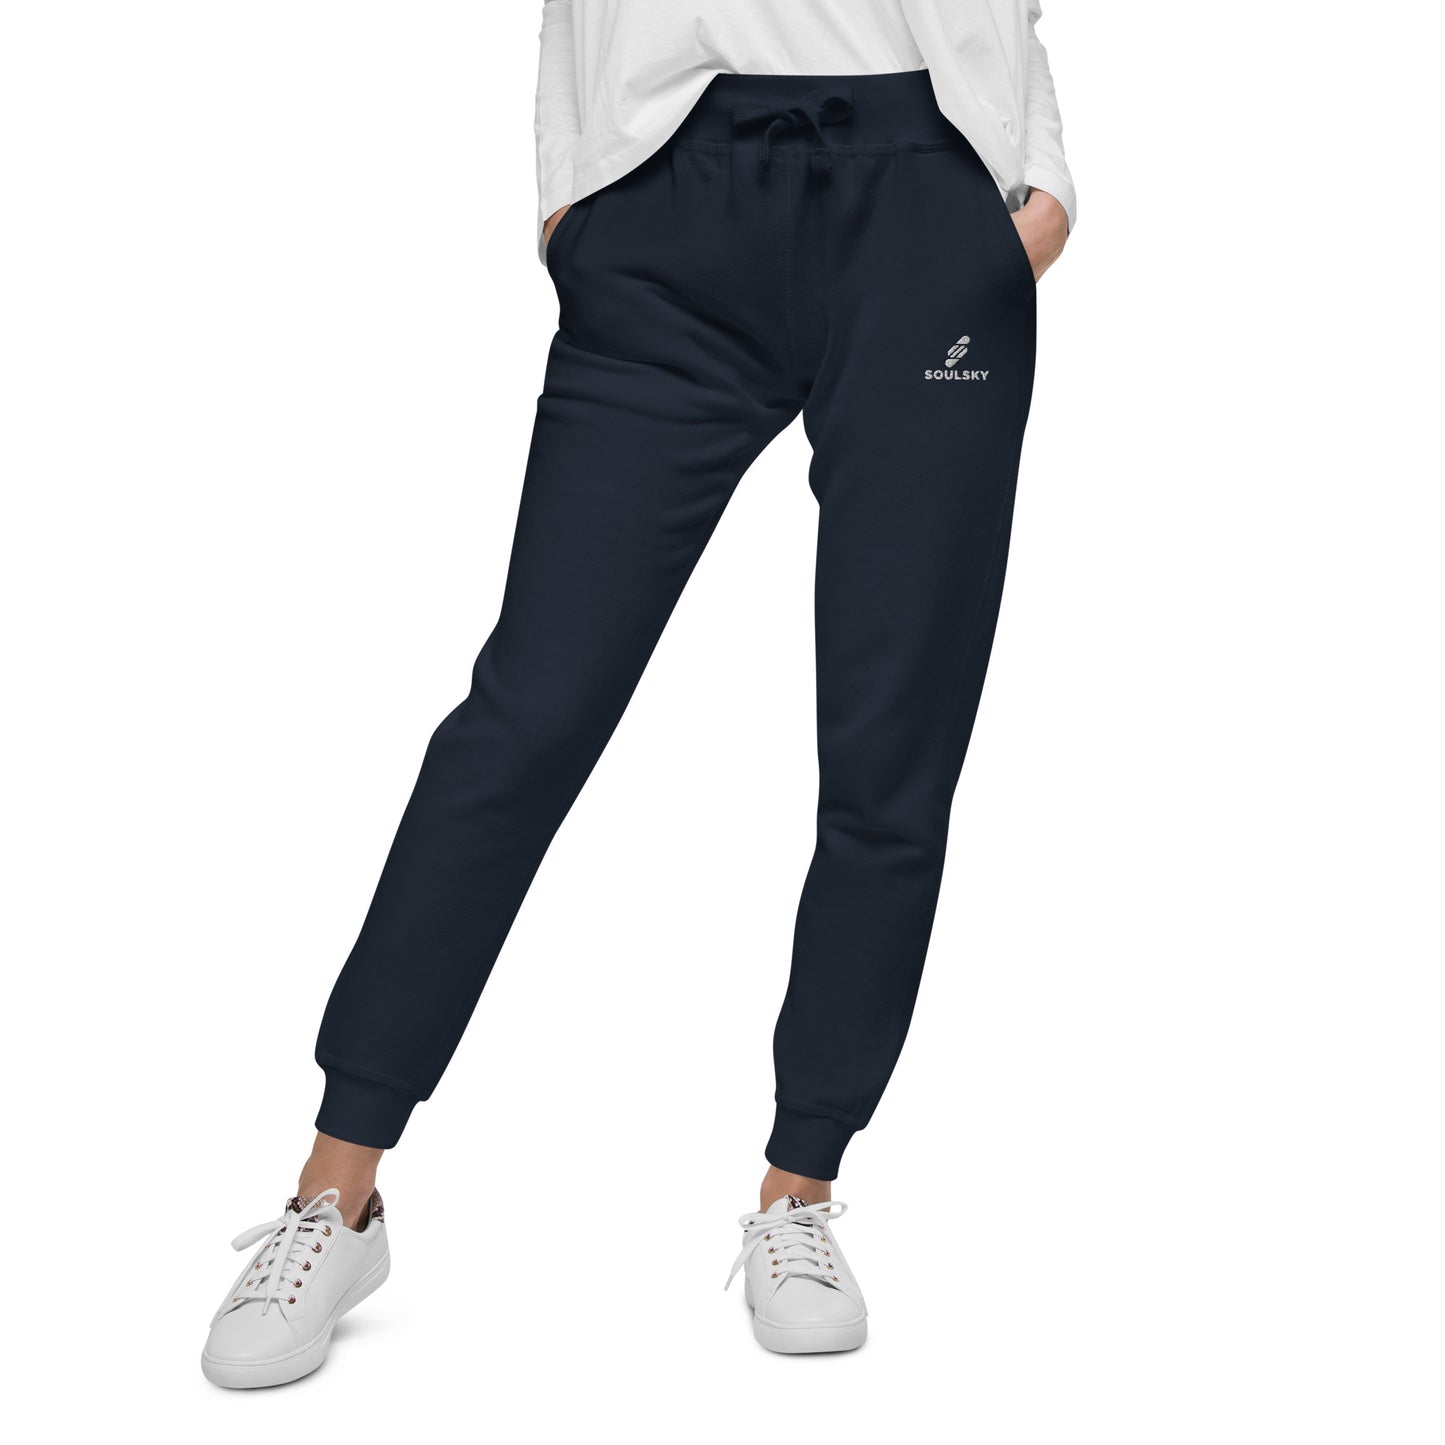 Female model wearing navy blue unisex joggers with white embroidered logo on left thigh that says "SOULSKY".